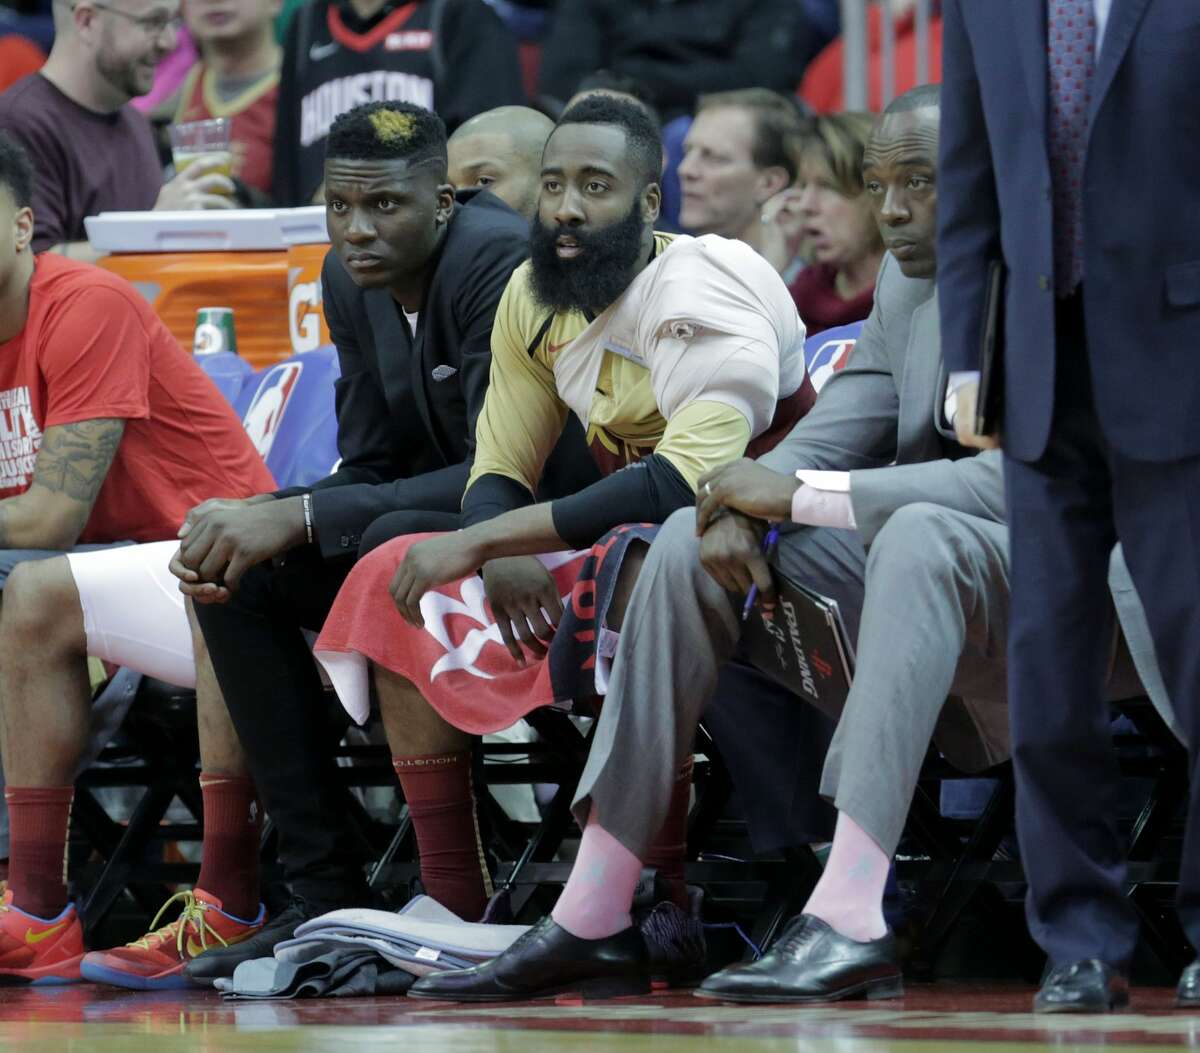 Houston Rockets guard James Harden (13) and center Clint Capela (15) watch as the Oklahoma City Thunder make a comeback in the third quarter at the Toyota Center on Saturday, Feb. 9, 2019 in Houston. Houston Rockets lost the game 117-112.